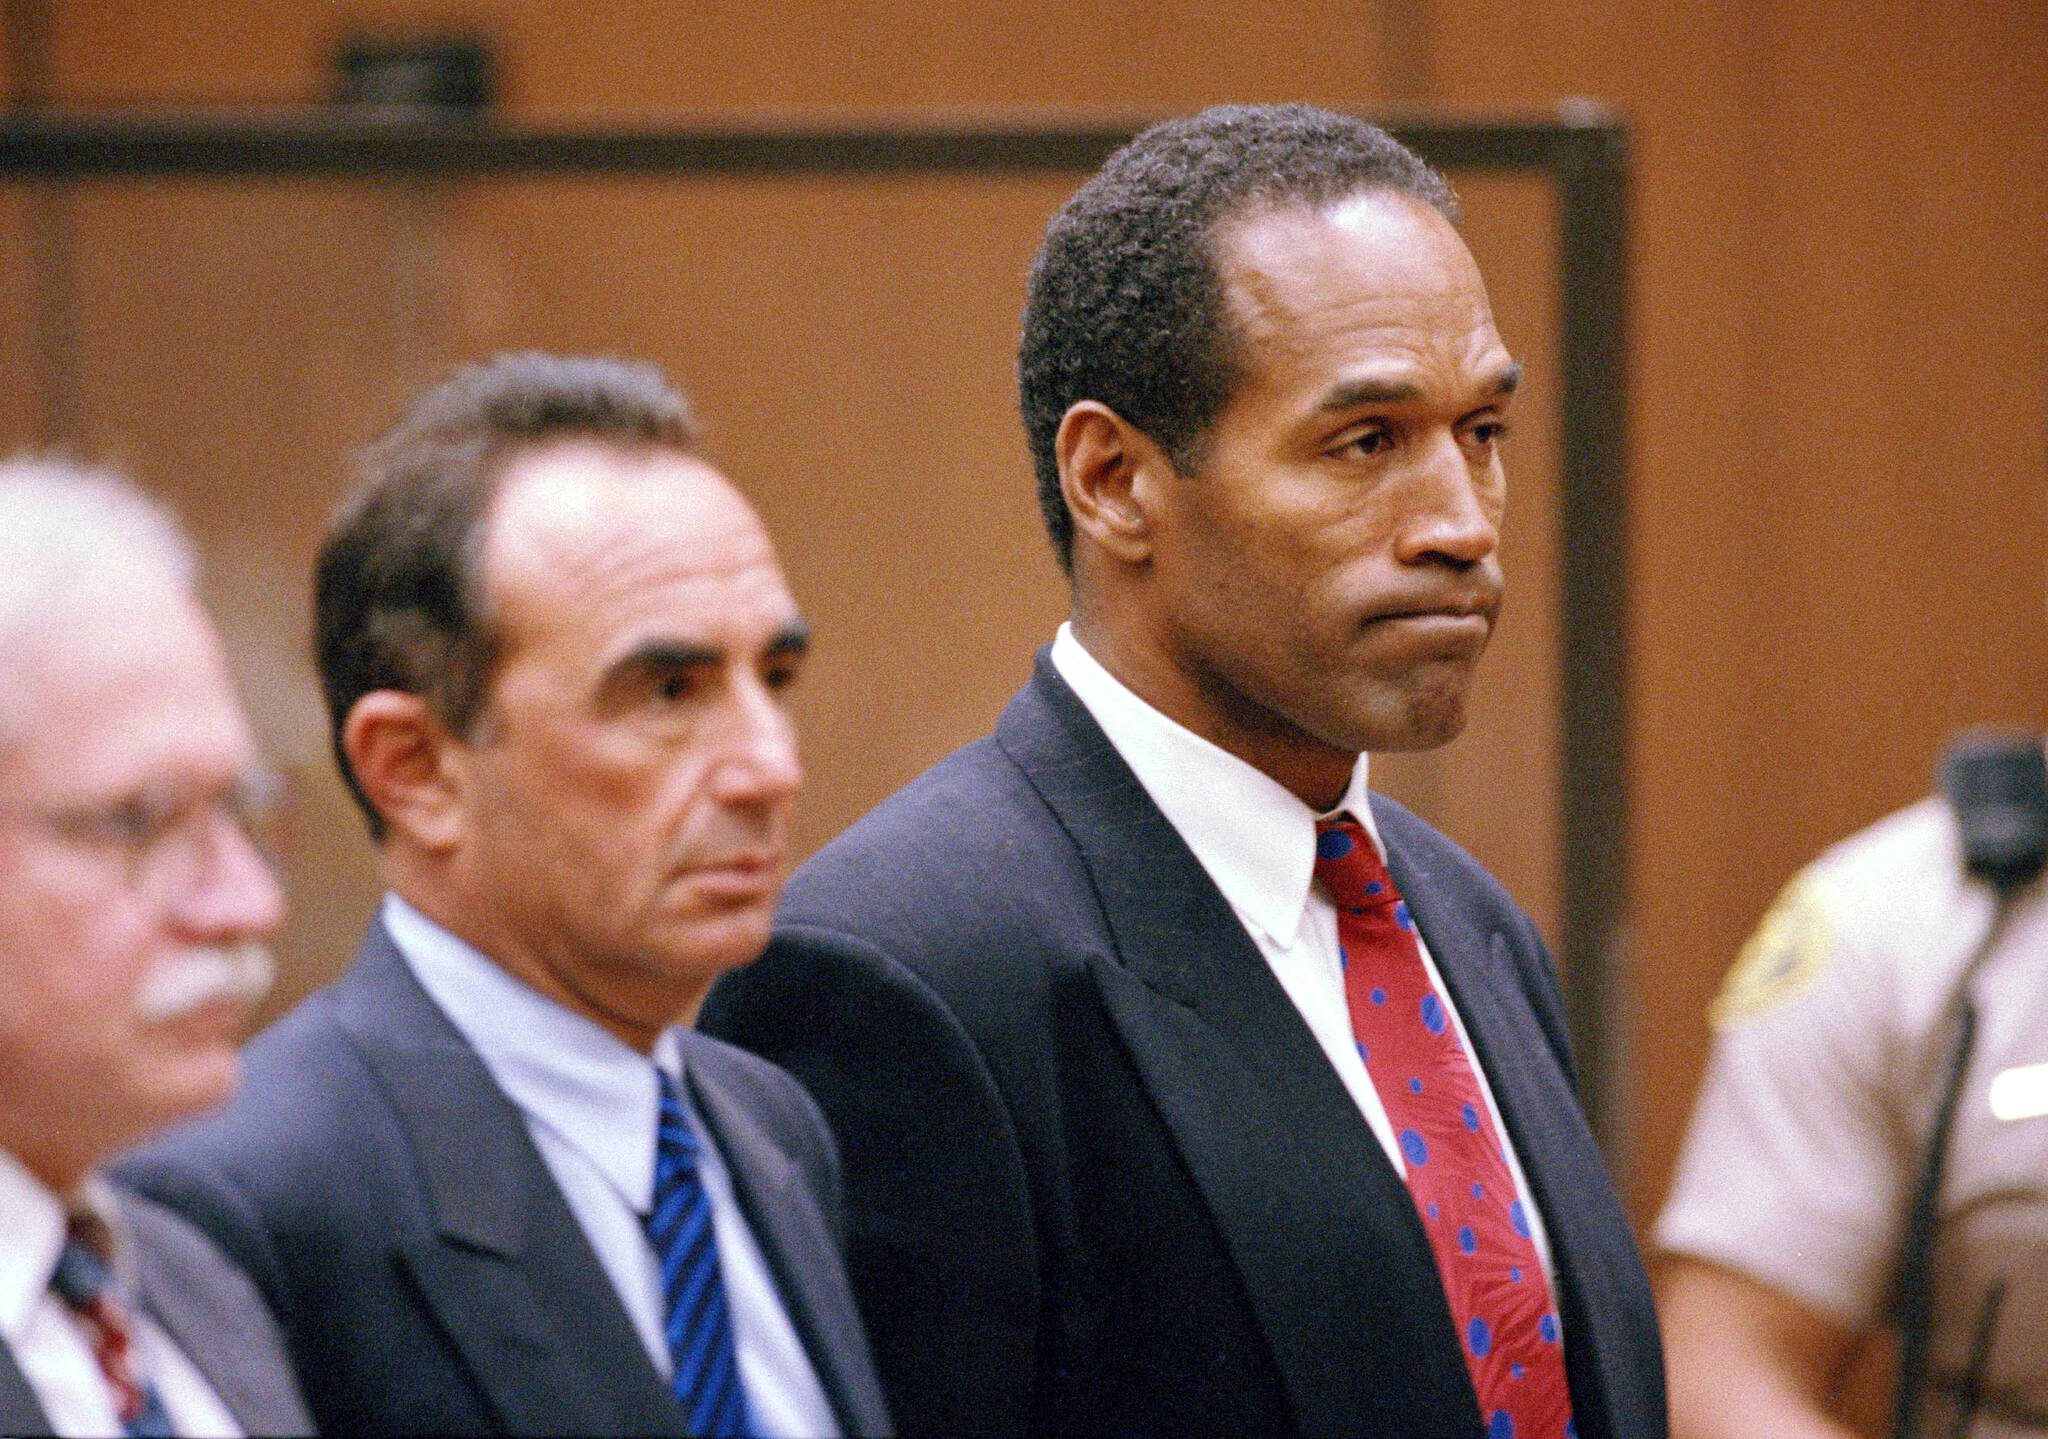 O.J. Simpson stands as he listens to Municipal Judge Kathleen Kennedy-Powell as she reads her decision to hold him over for trial on July 8, 1994, in connection with the June 12 slayings of his ex-wife Nicole Brown Simpson and Ronald Goldman. Simpson, the decorated football superstar and Hollywood actor who was acquitted of charges he killed his former wife and her friend but later found liable in a separate civil trial, has died. He was 76. (AP Photo/Eric Draper, Pool, File)